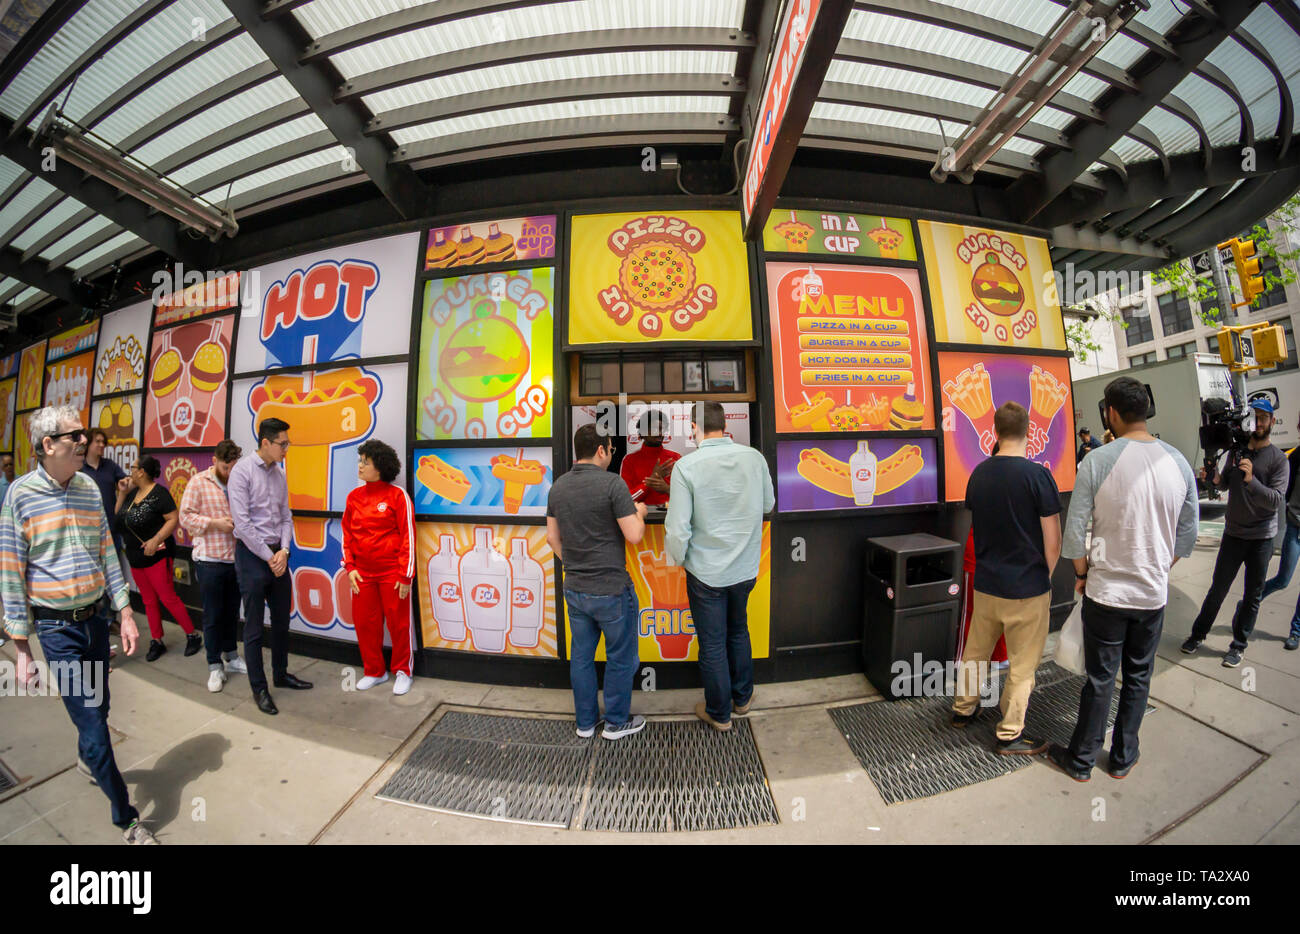 Participants line up to to be filmed trying samples of products from the fictional company â€œBuy n Largeâ€, in Midtown Manhattan in New York on Wednesday, May 8, 2019. â€œBuy n Largeâ€ is a fictional company used in several of Pixar films including â€œWALL-Eâ€.  (Â© Richard B. Levine) Stock Photo